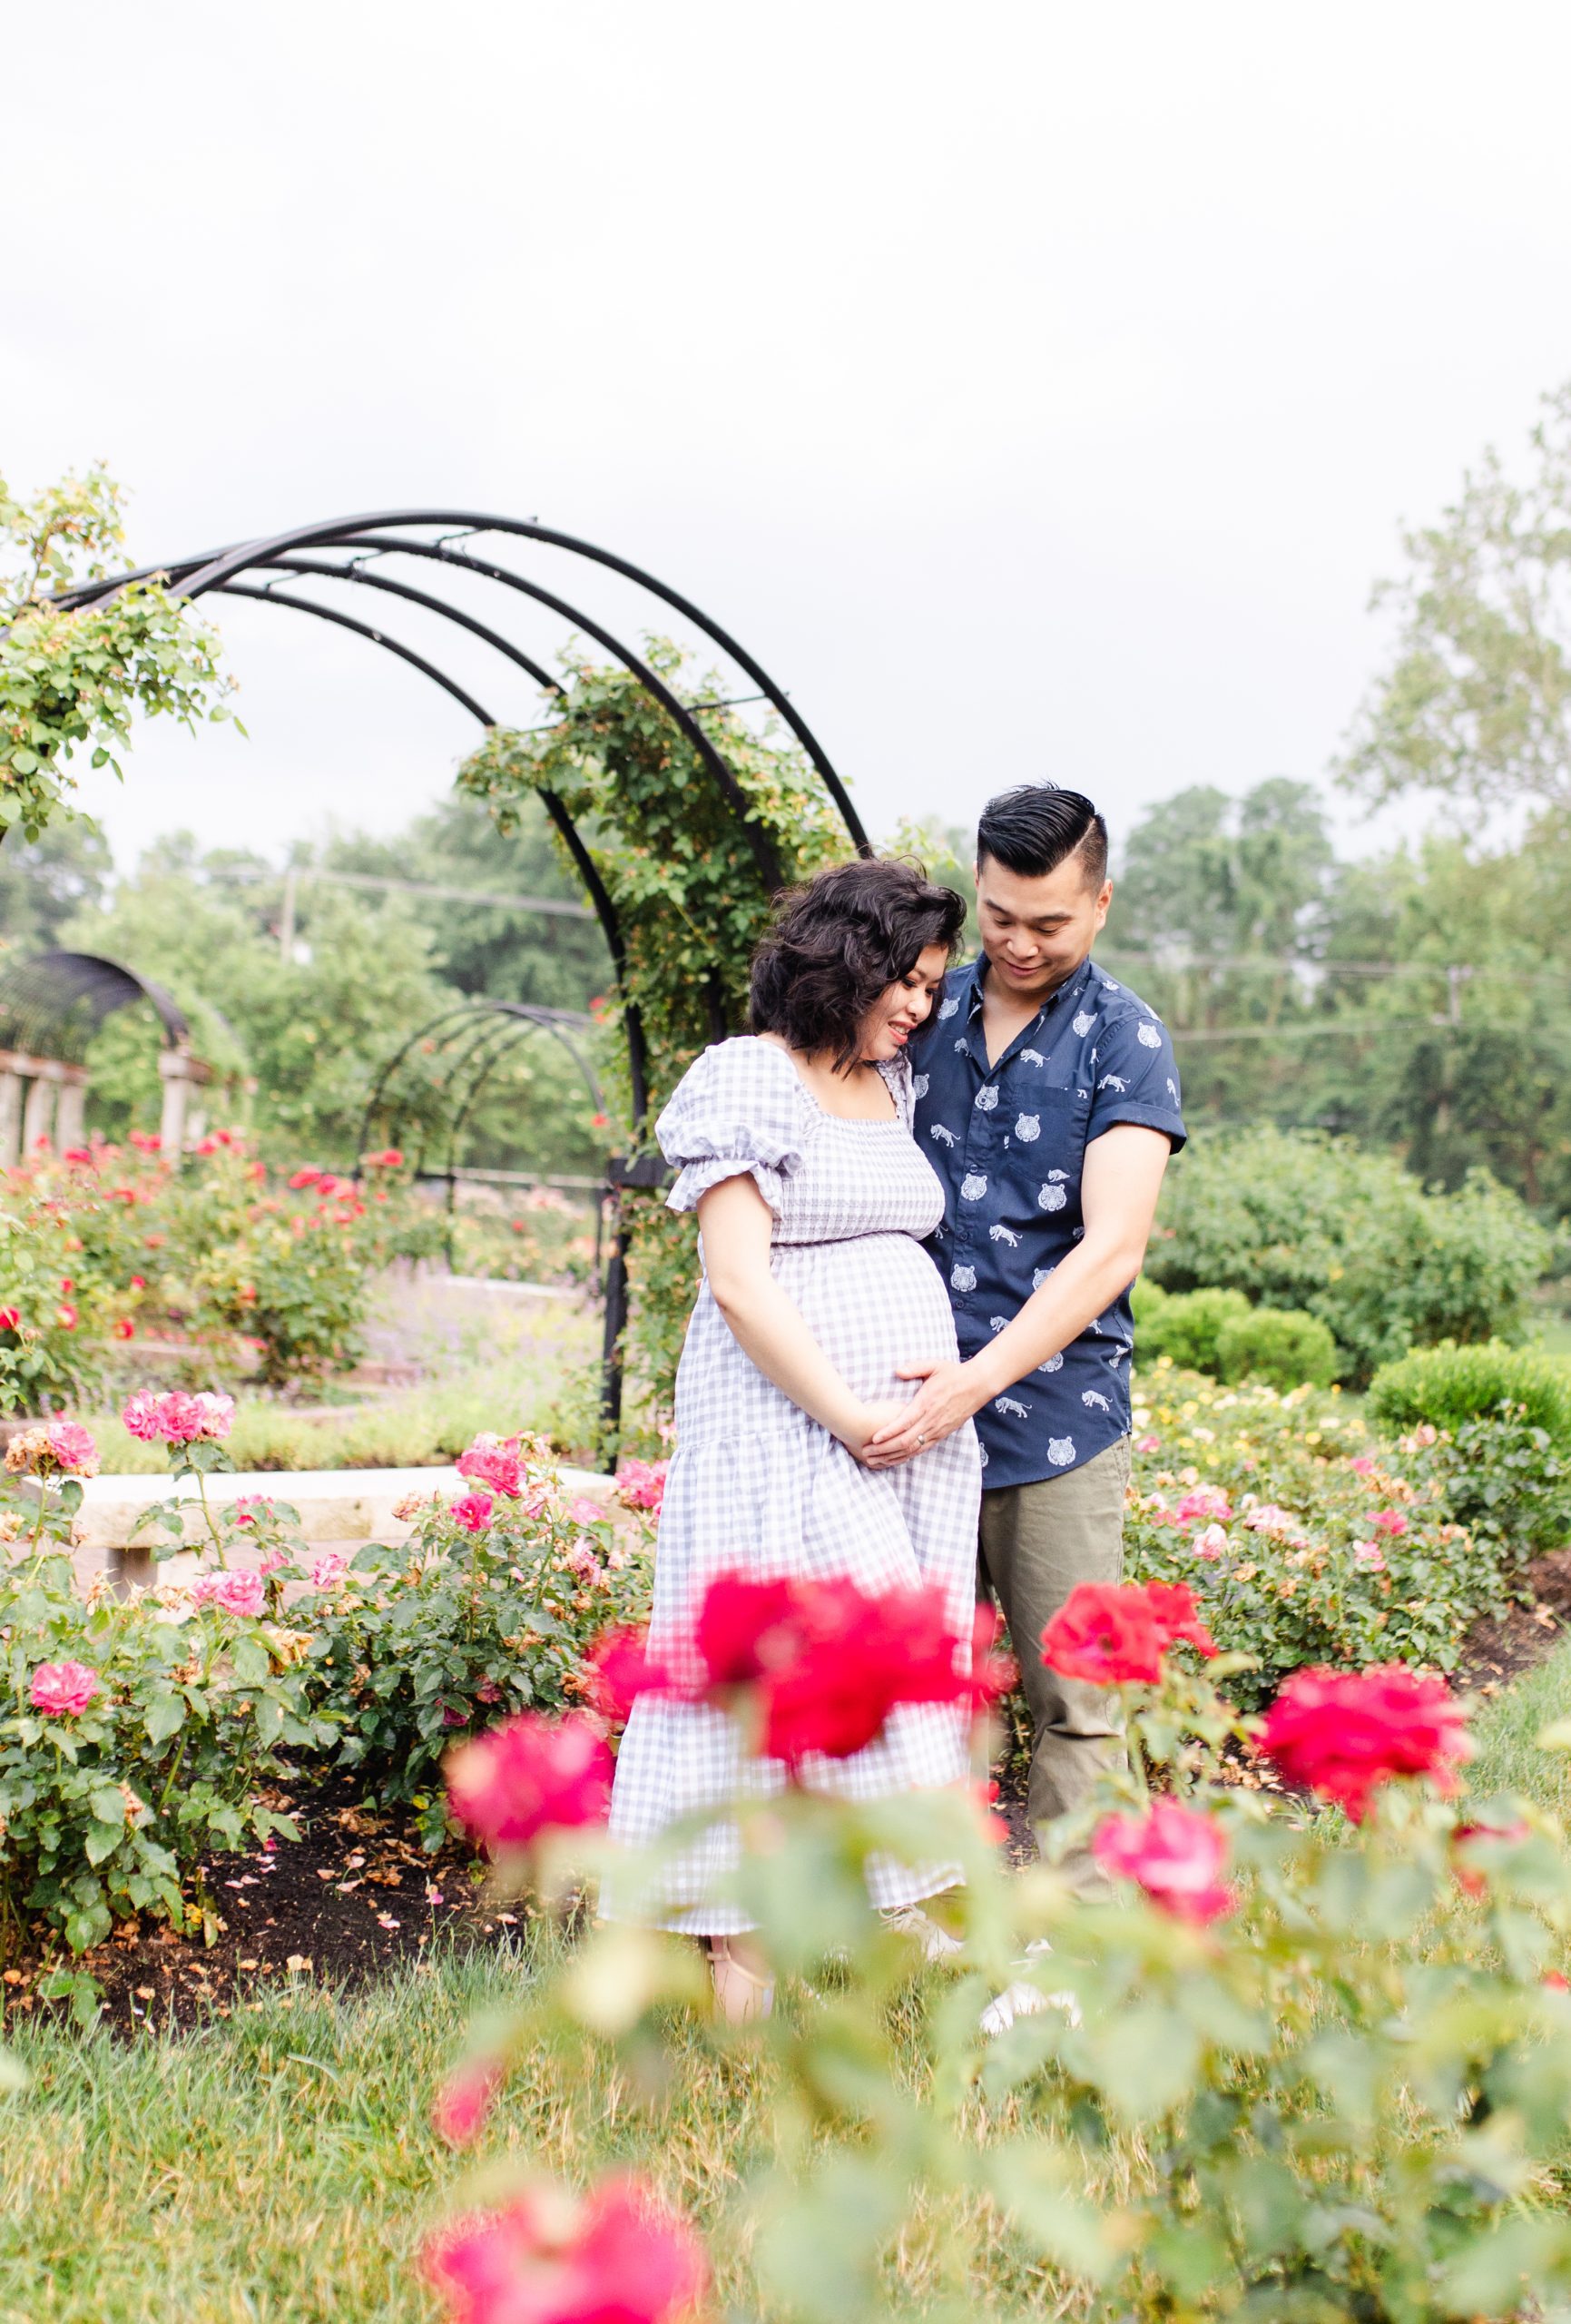 dad and mom-to-be posing amongst the roses at bon air park by northern virginia maternity photographer